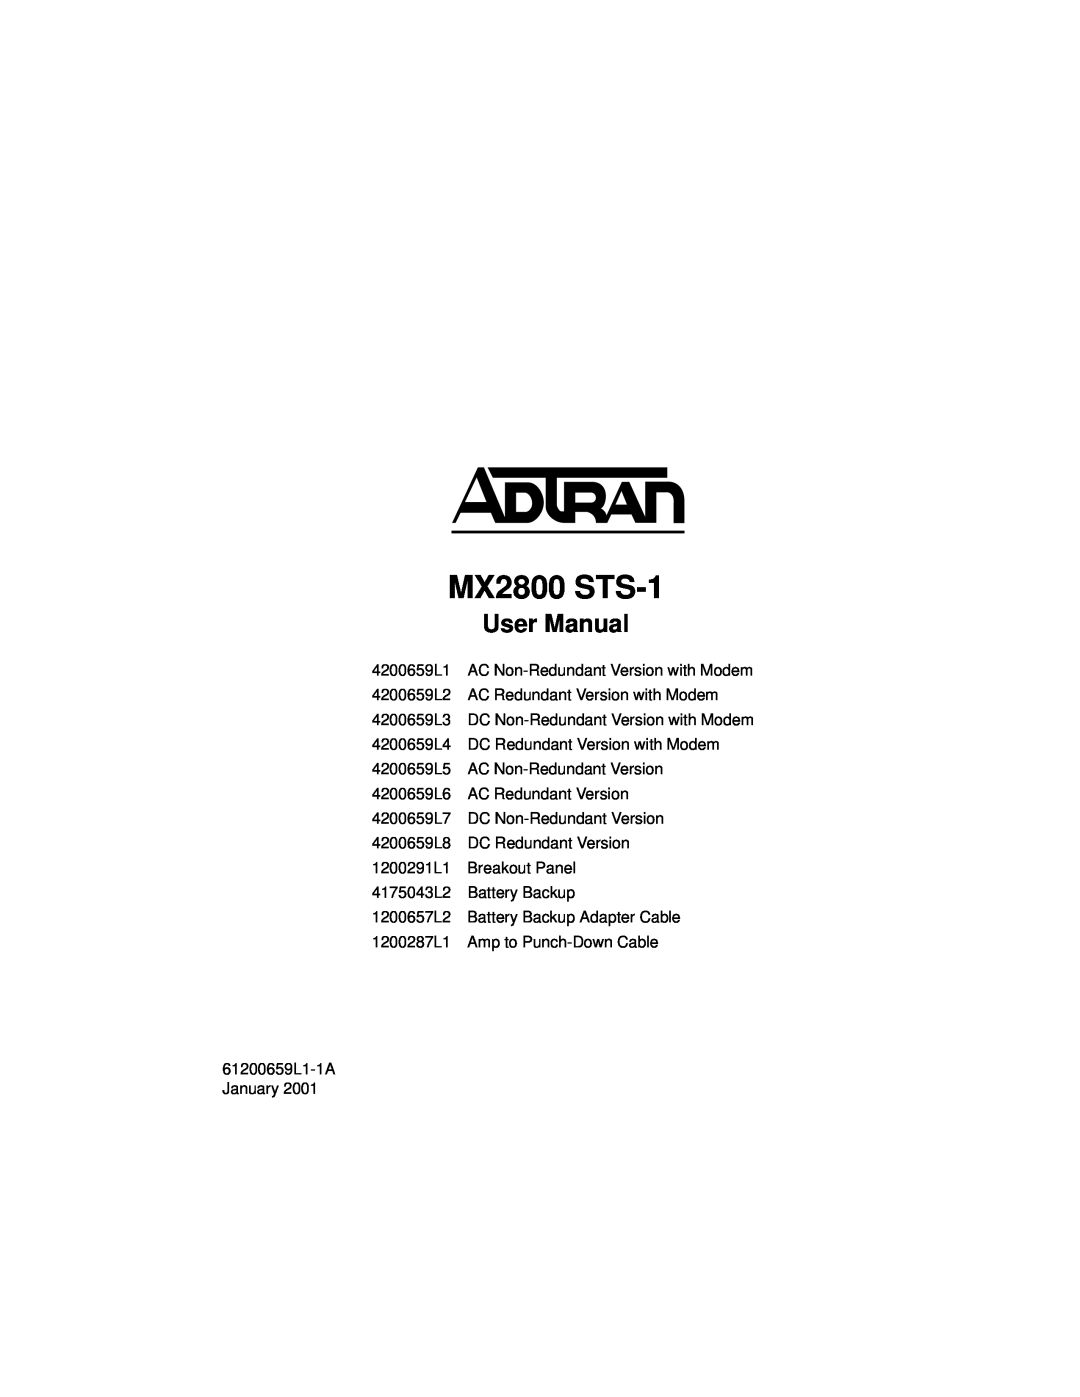 ADTRAN 4175043L2, 4200659L1, 4200659L5, 4200659L8, 4200659L2, 4200659L7, 4200659L3 user manual User Manual, MX2800 STS-1 